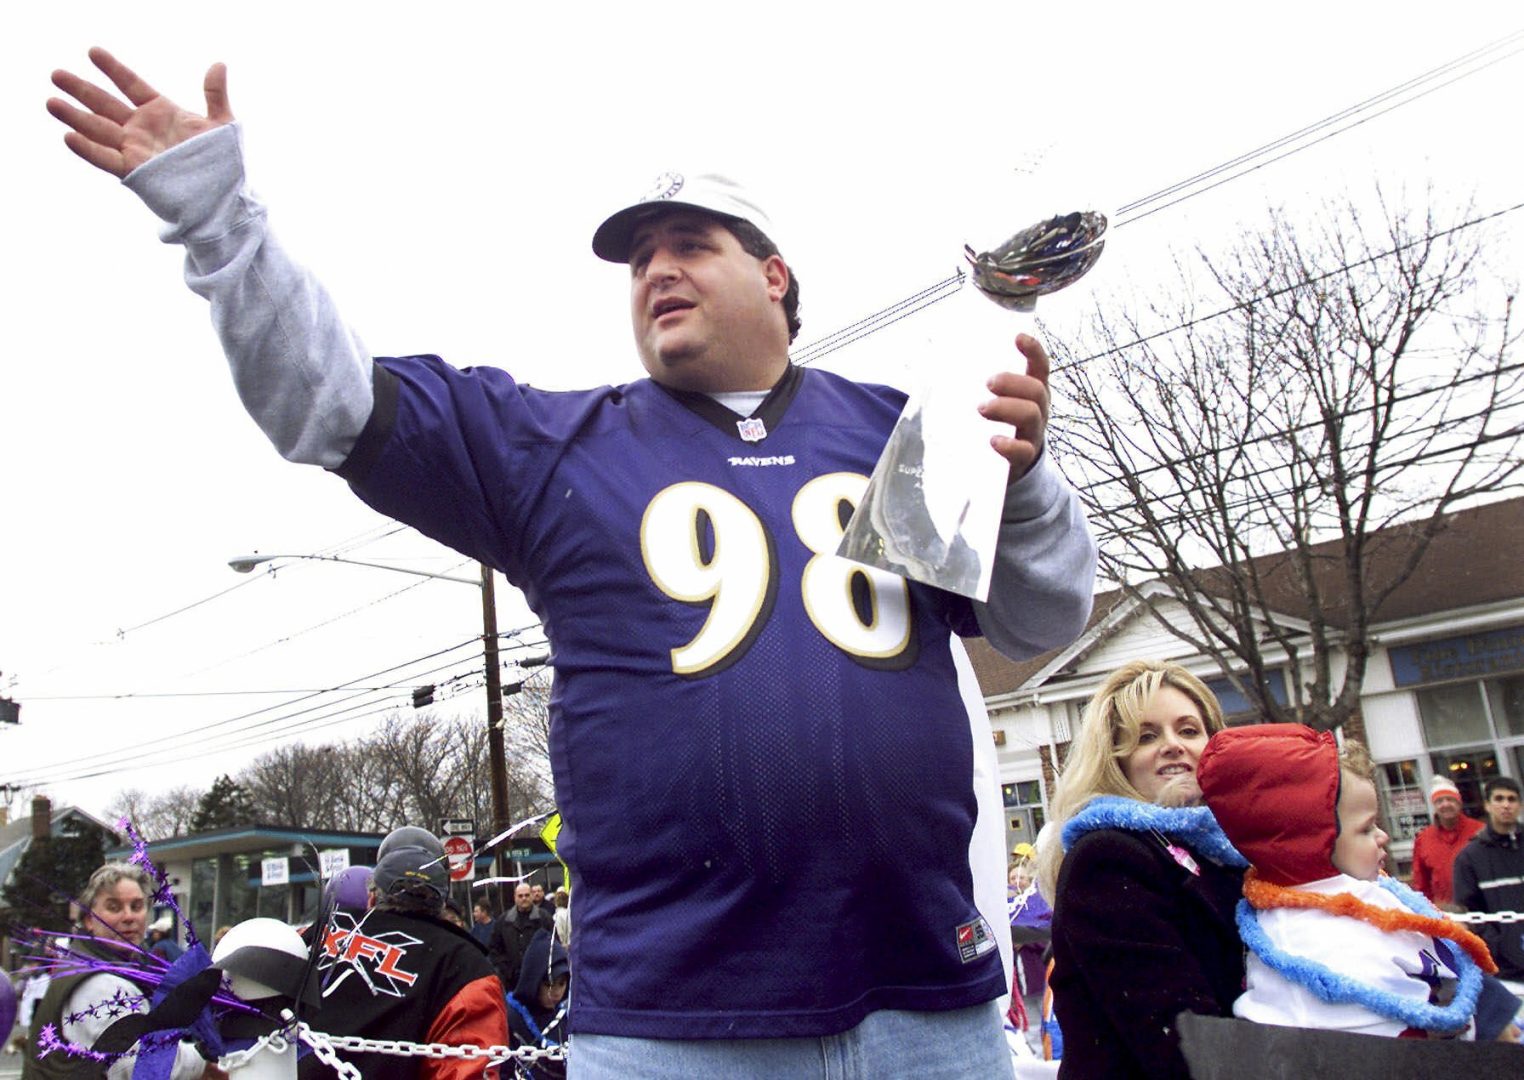 Tony Siragusa, defensive tackle for the Super Bowl-champion Baltimore Ravens, holds the Vince Lombardi trophy as he rides with his wife, Kathy, in a parade in his hometown of Kenilworth, N.J. on March 4, 2001. 